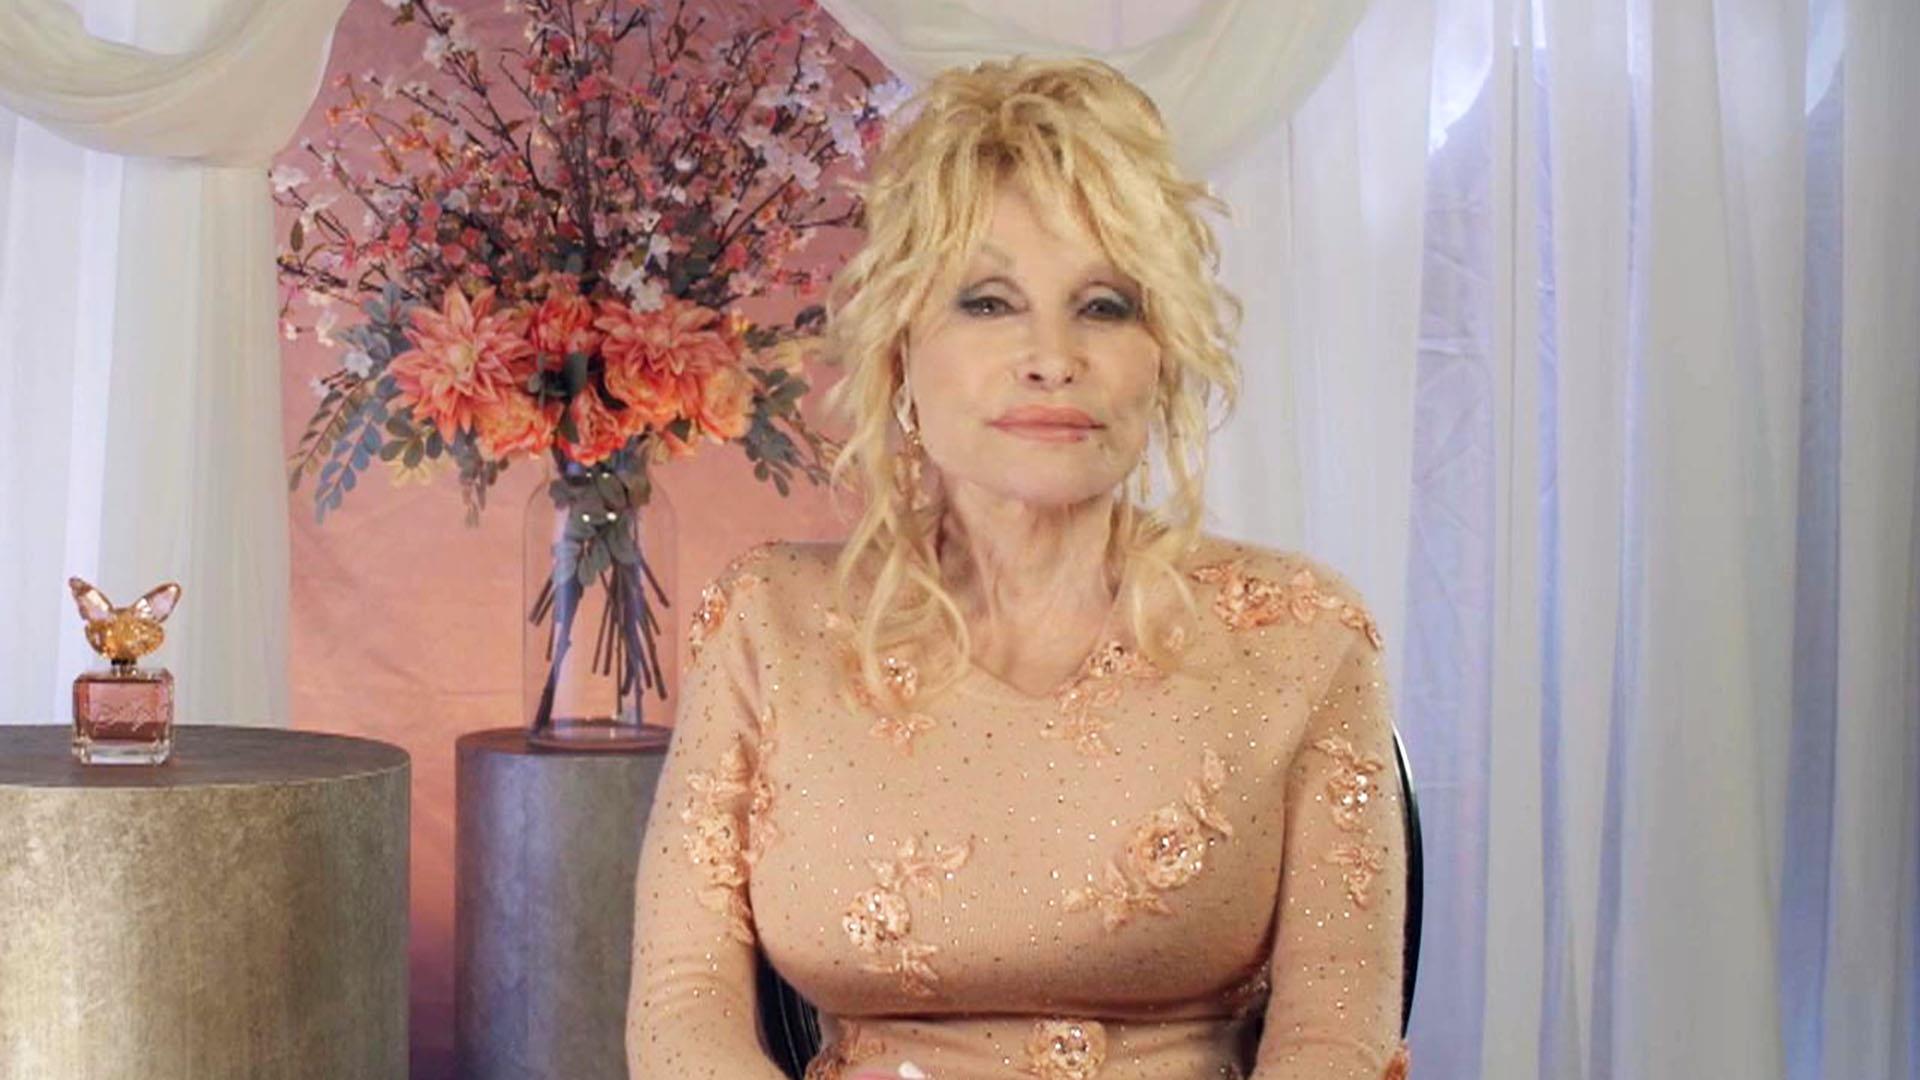 Watch Today Highlight Dolly Parton Reveals Why She S Hesitant To Receive Medal Of Freedom Nbc Com